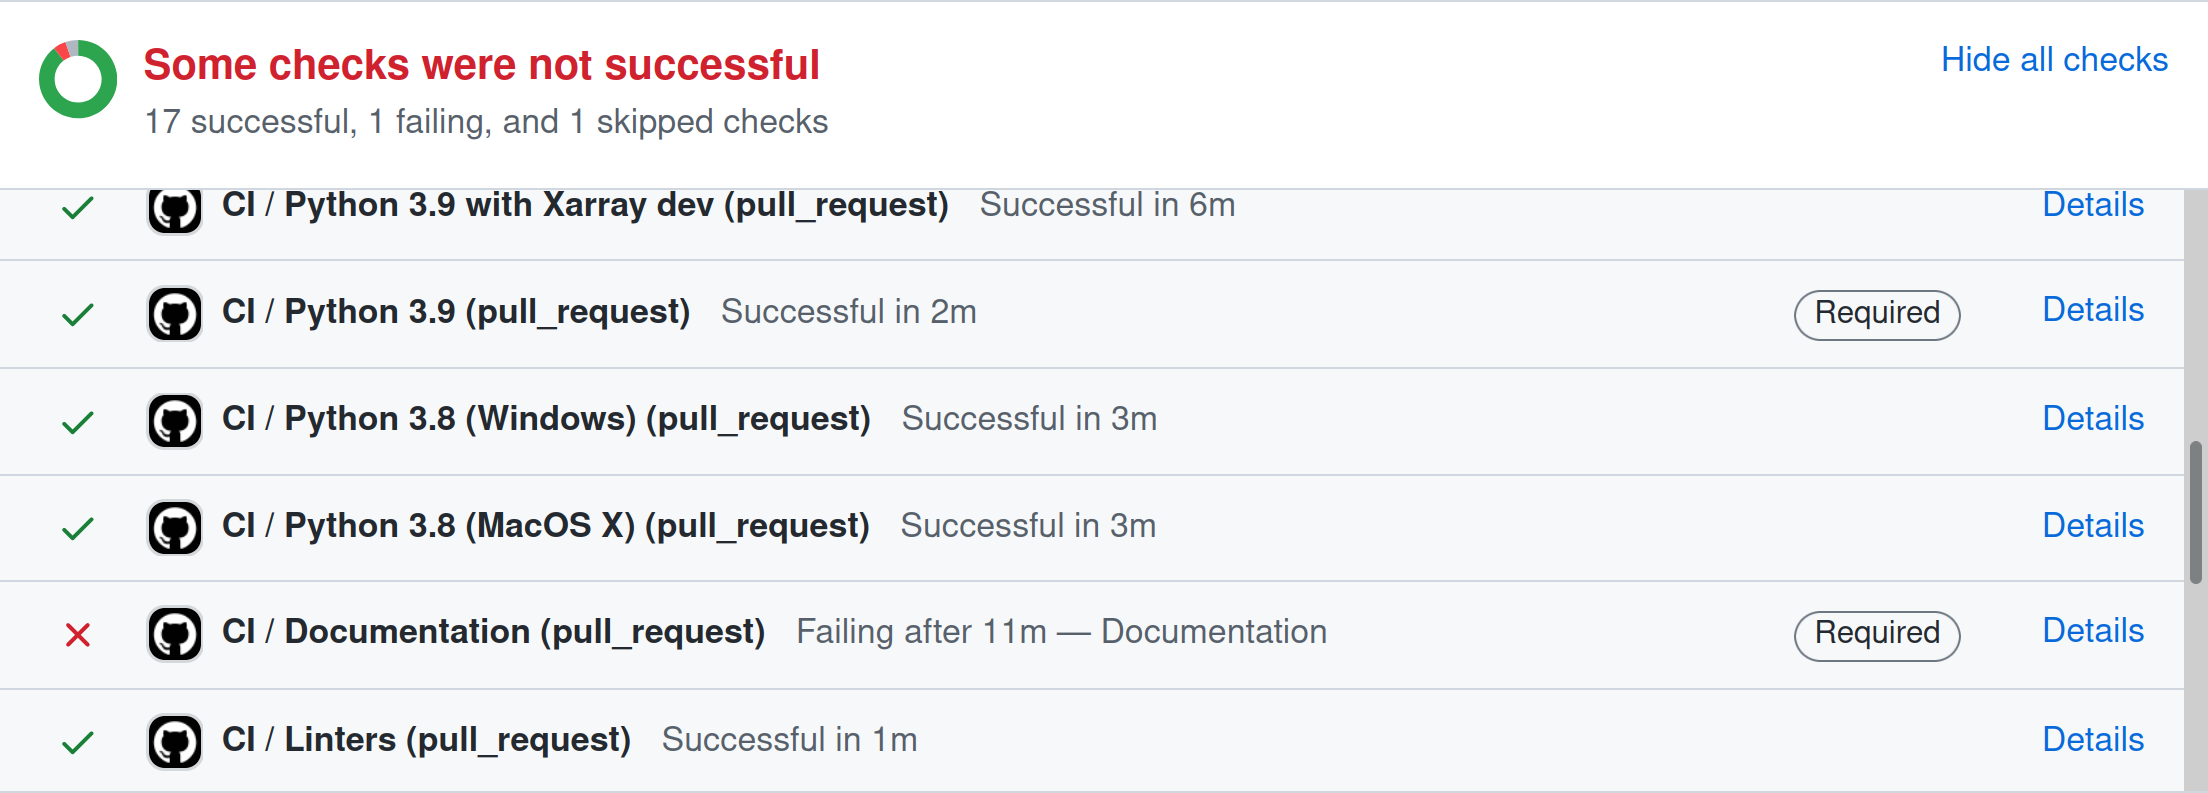 Continuous integration test results during a pull request